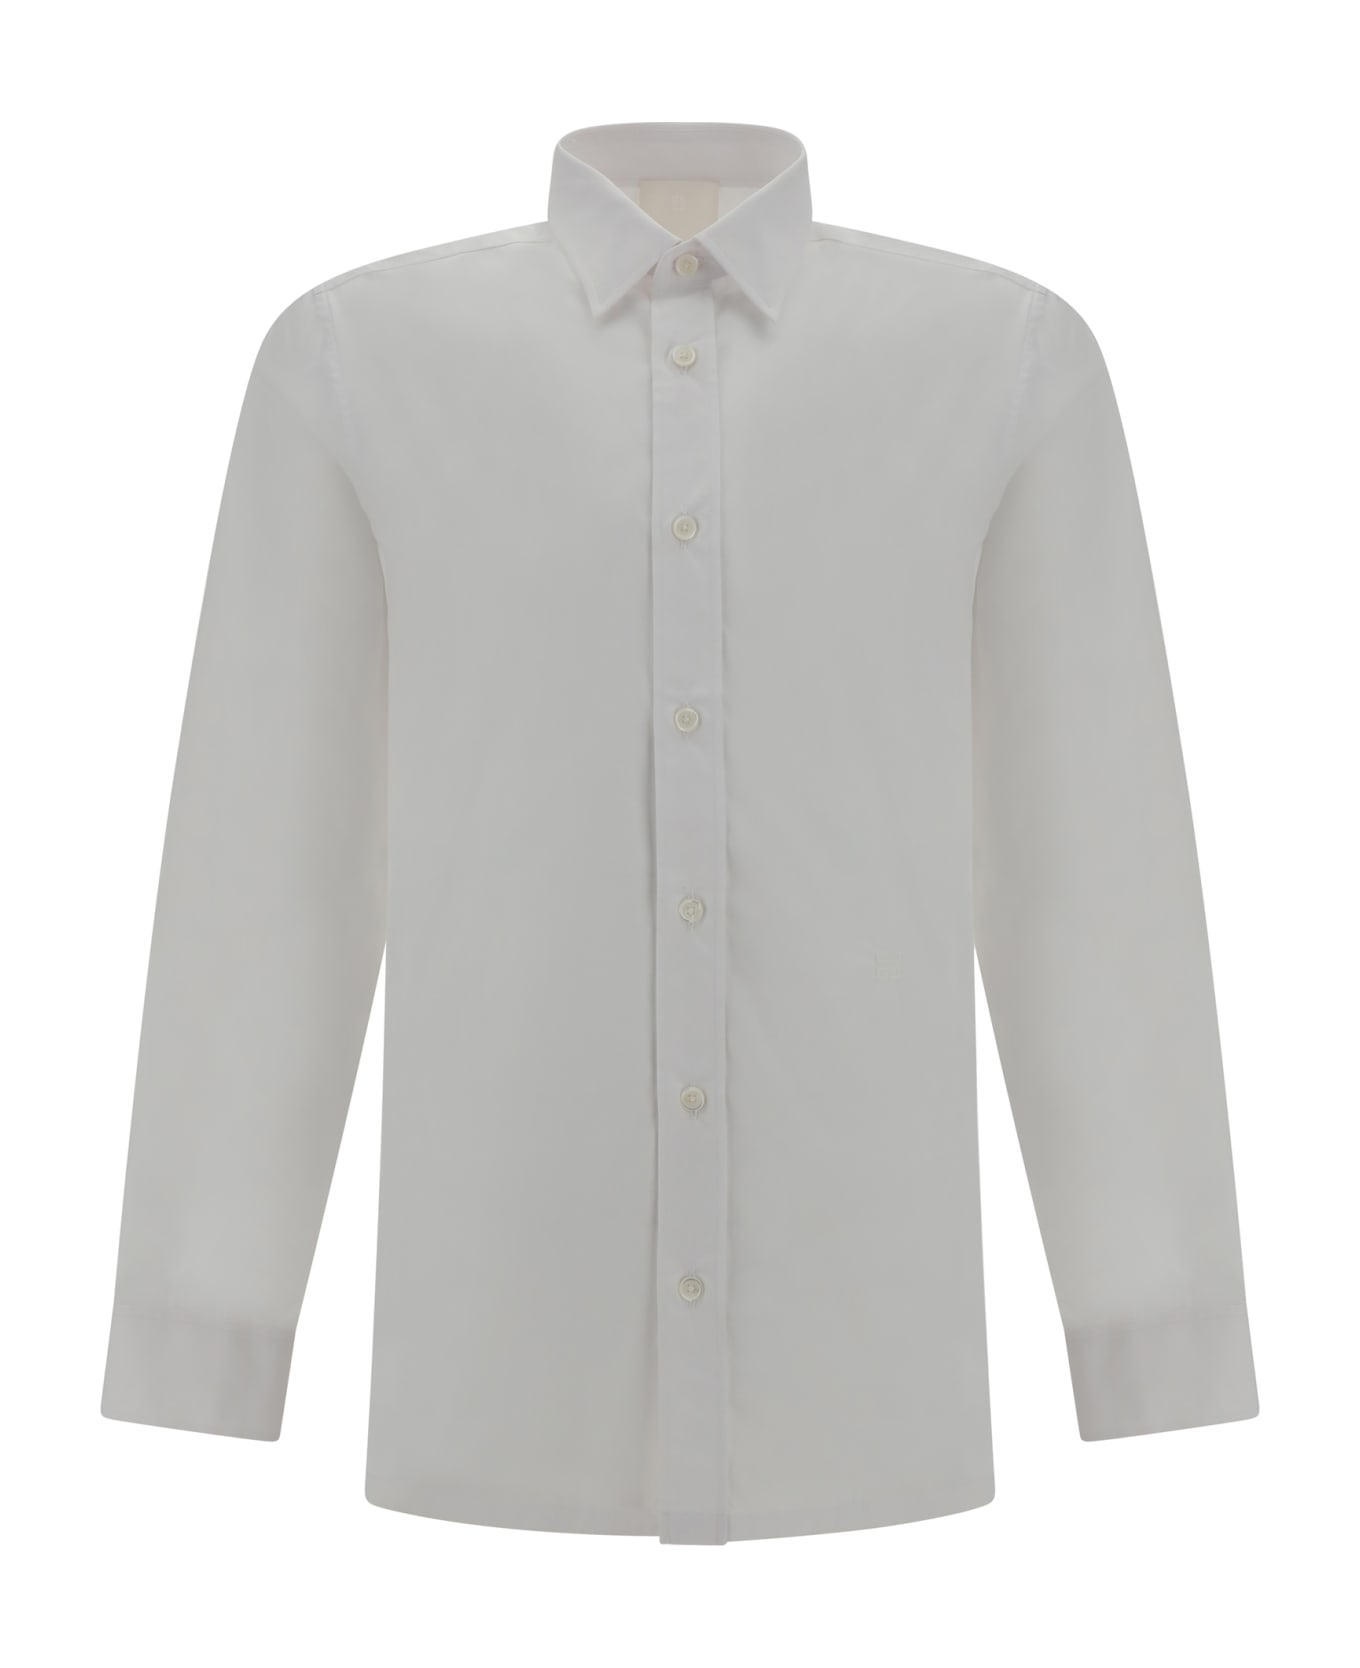 Givenchy Logo Embroidery Shirt - White シャツ